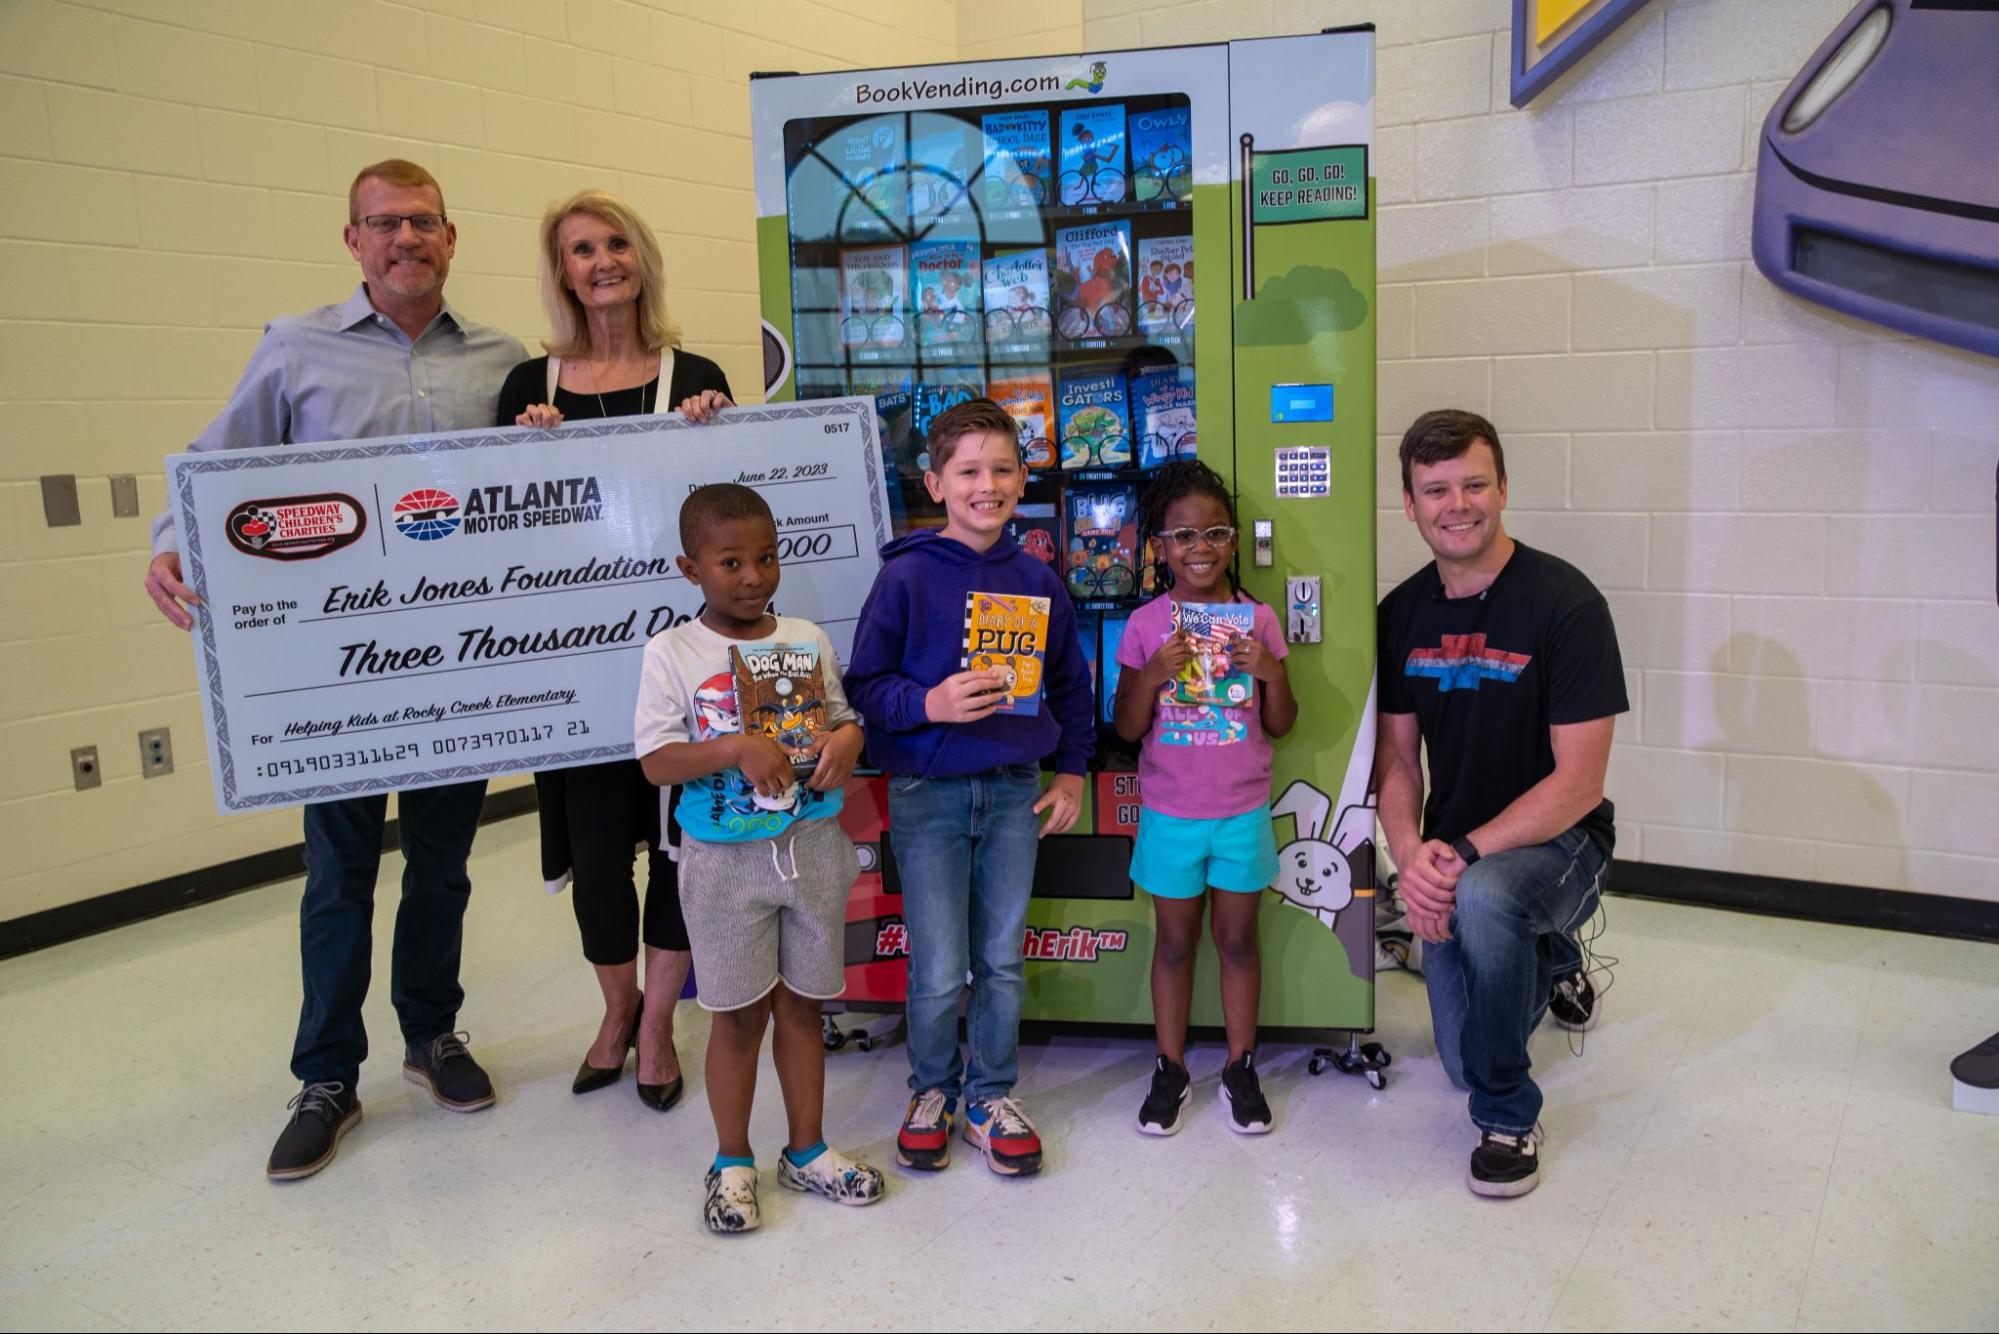 Erik Jones of NASCAR with administrators & students posing in front of Rocky Creek Elementary’s new Inchy bookworm book vending machine, proudly donated by Erik Jones Foundation.